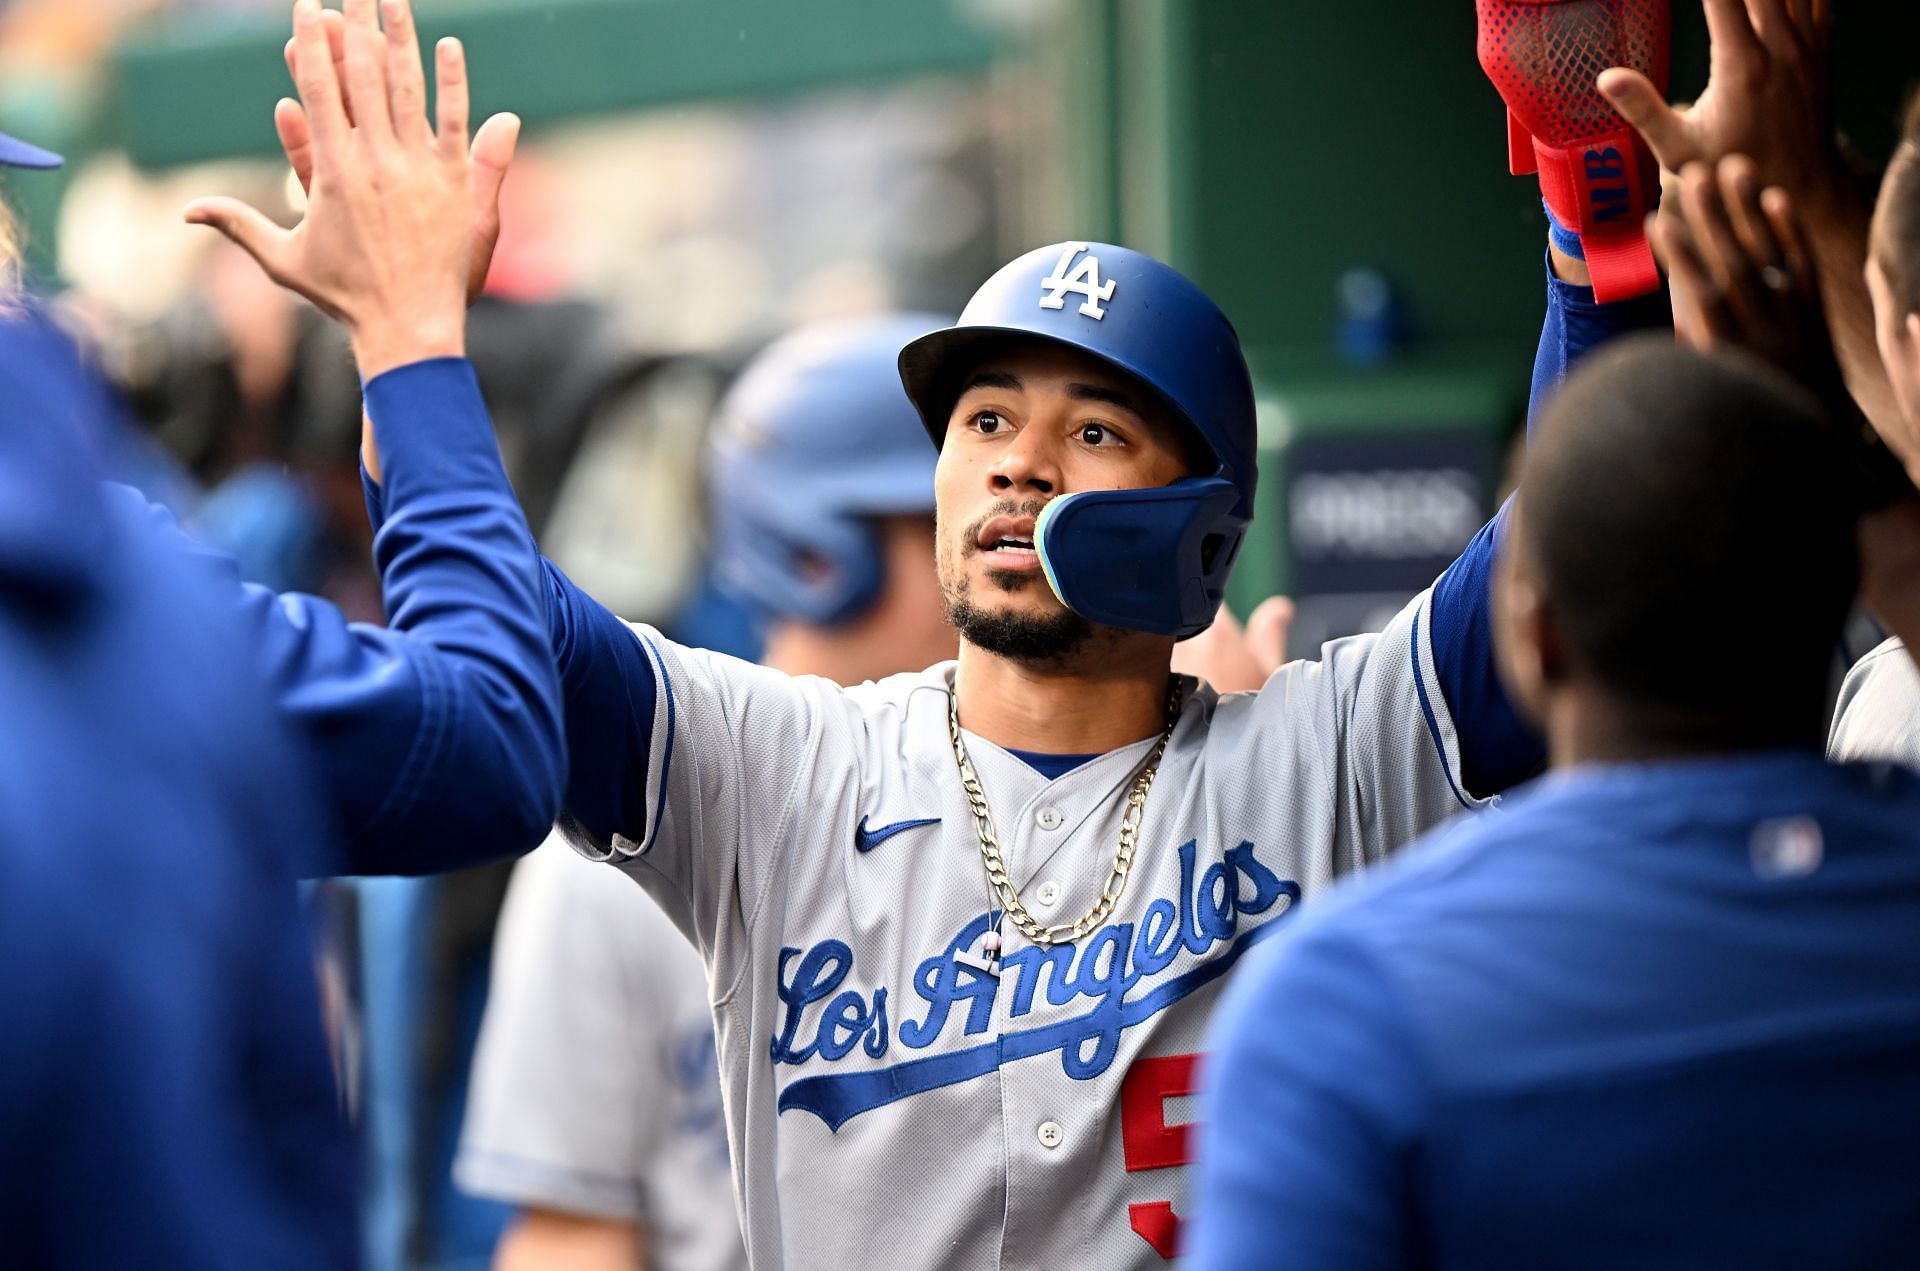 Los Angeles Dodgers outfielder Mookie Betts has put together a phenomenal season so far.